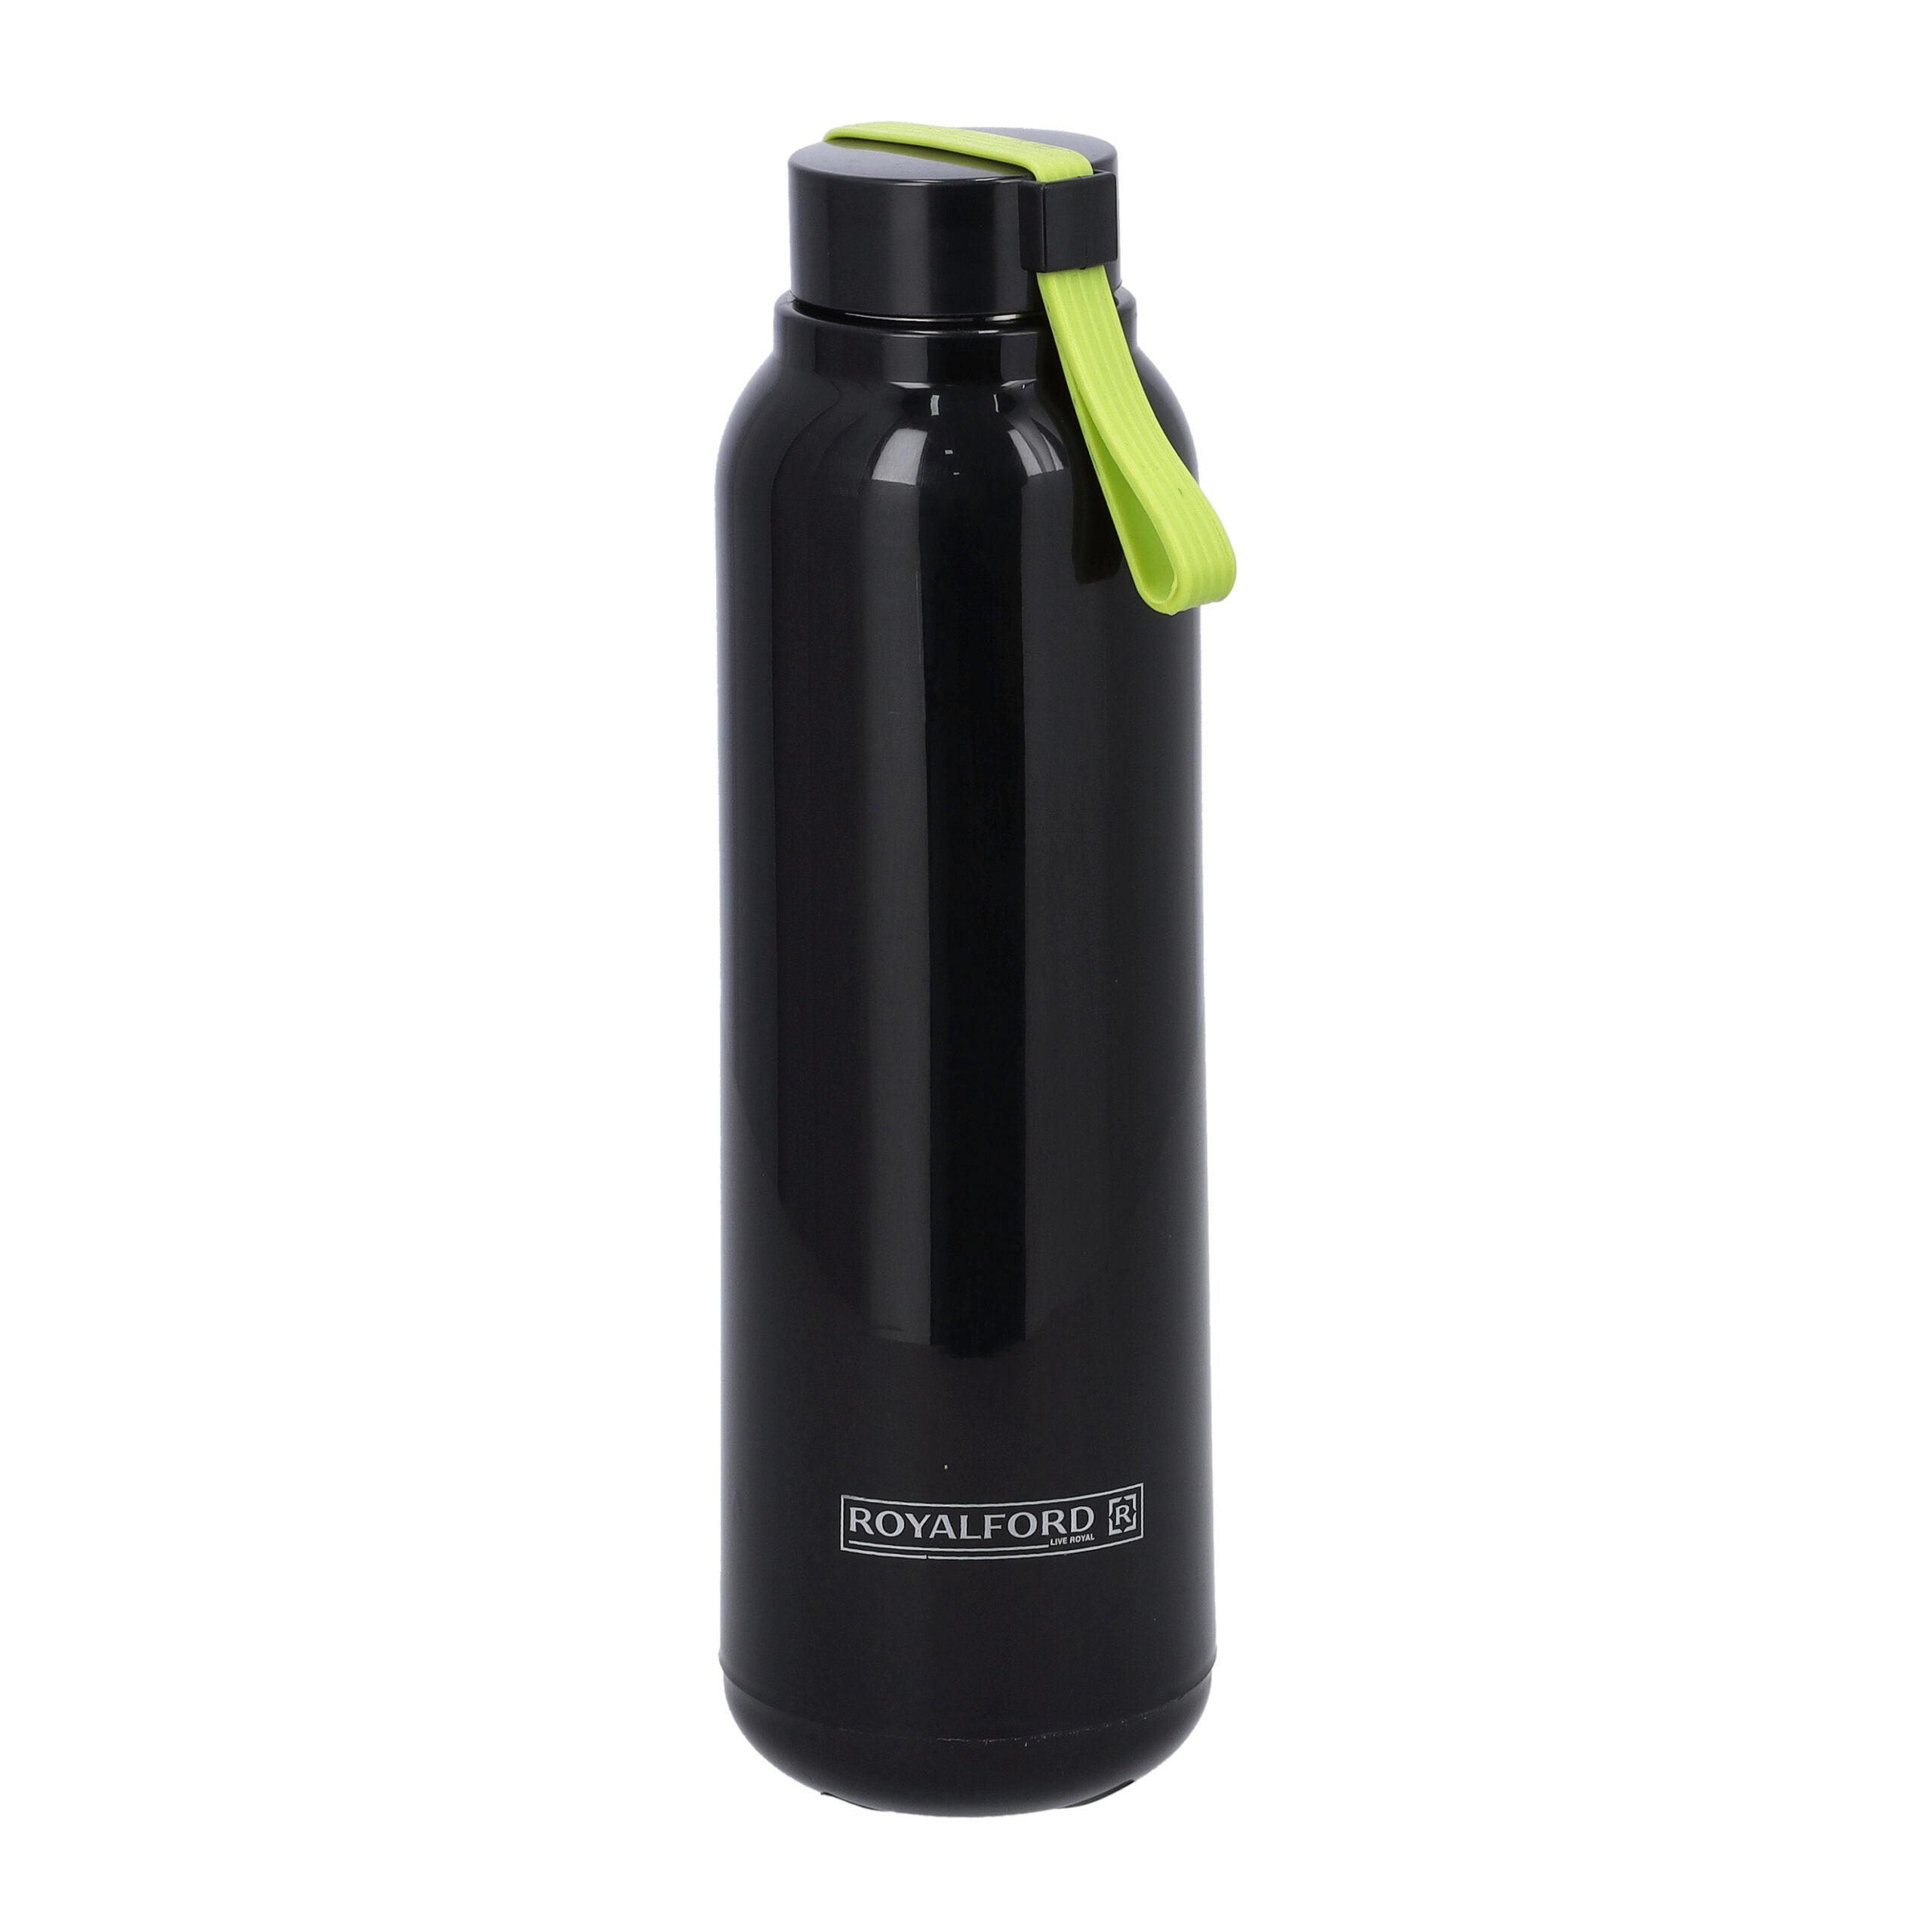 Royalford Insulated Water Bottle with Silicon Sealing Ring | RF10022 | BPA Free | Odour Free | 1000 ml | Durable Body | Ideal for Hiking, Camping, Office and School Purpose